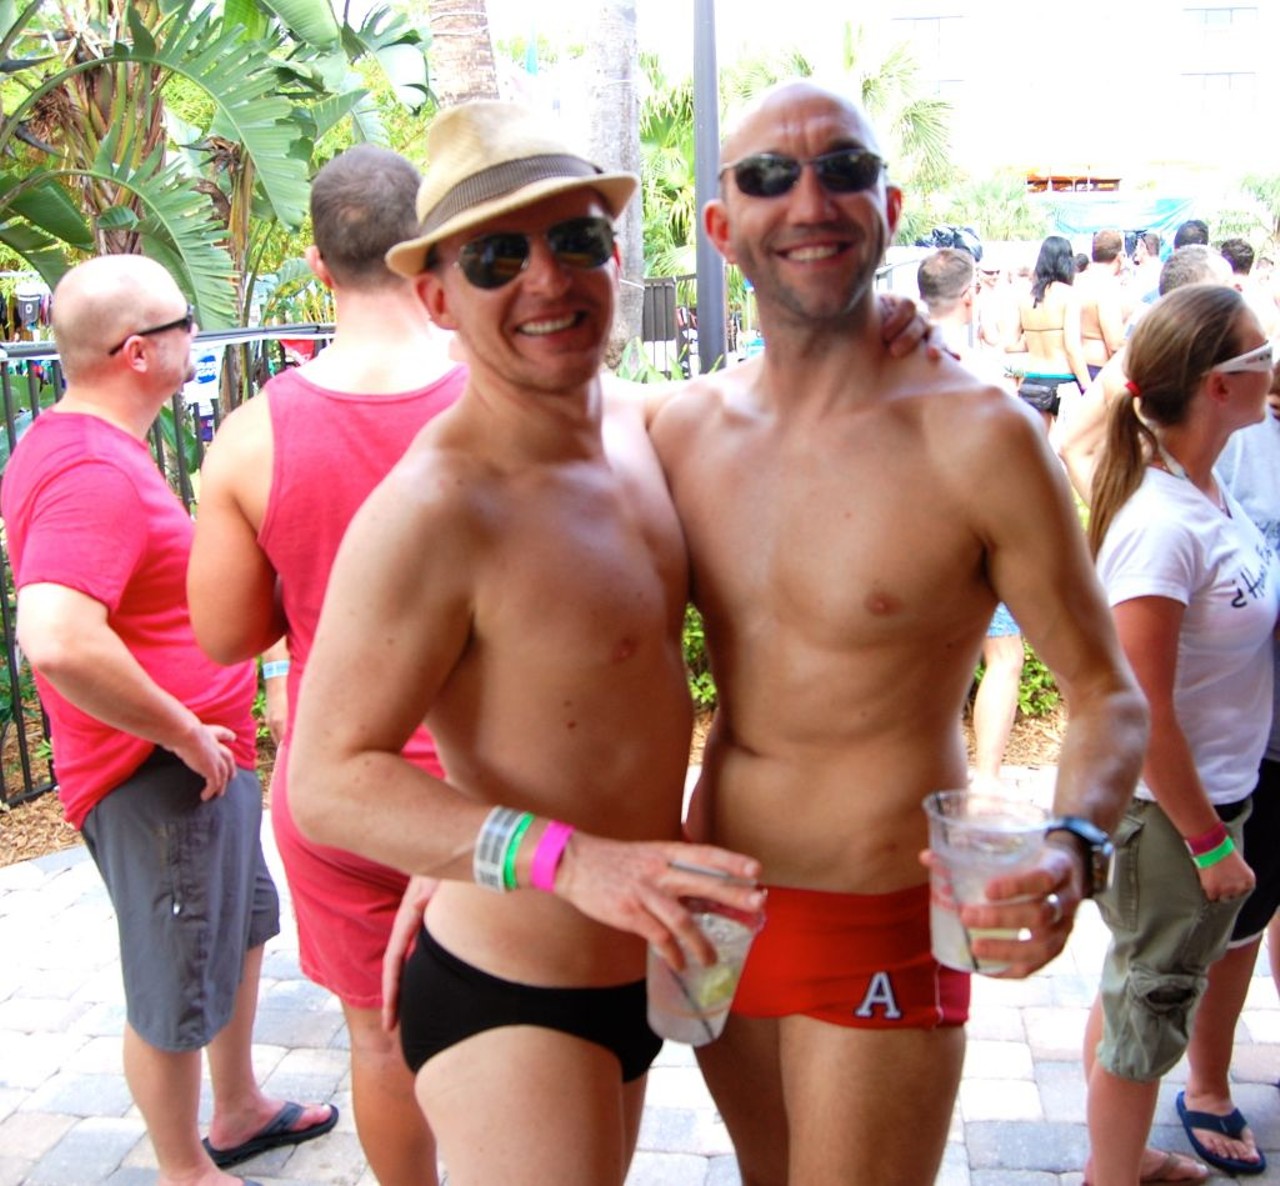 11 Hot Bodies at Gays Days Pool Party